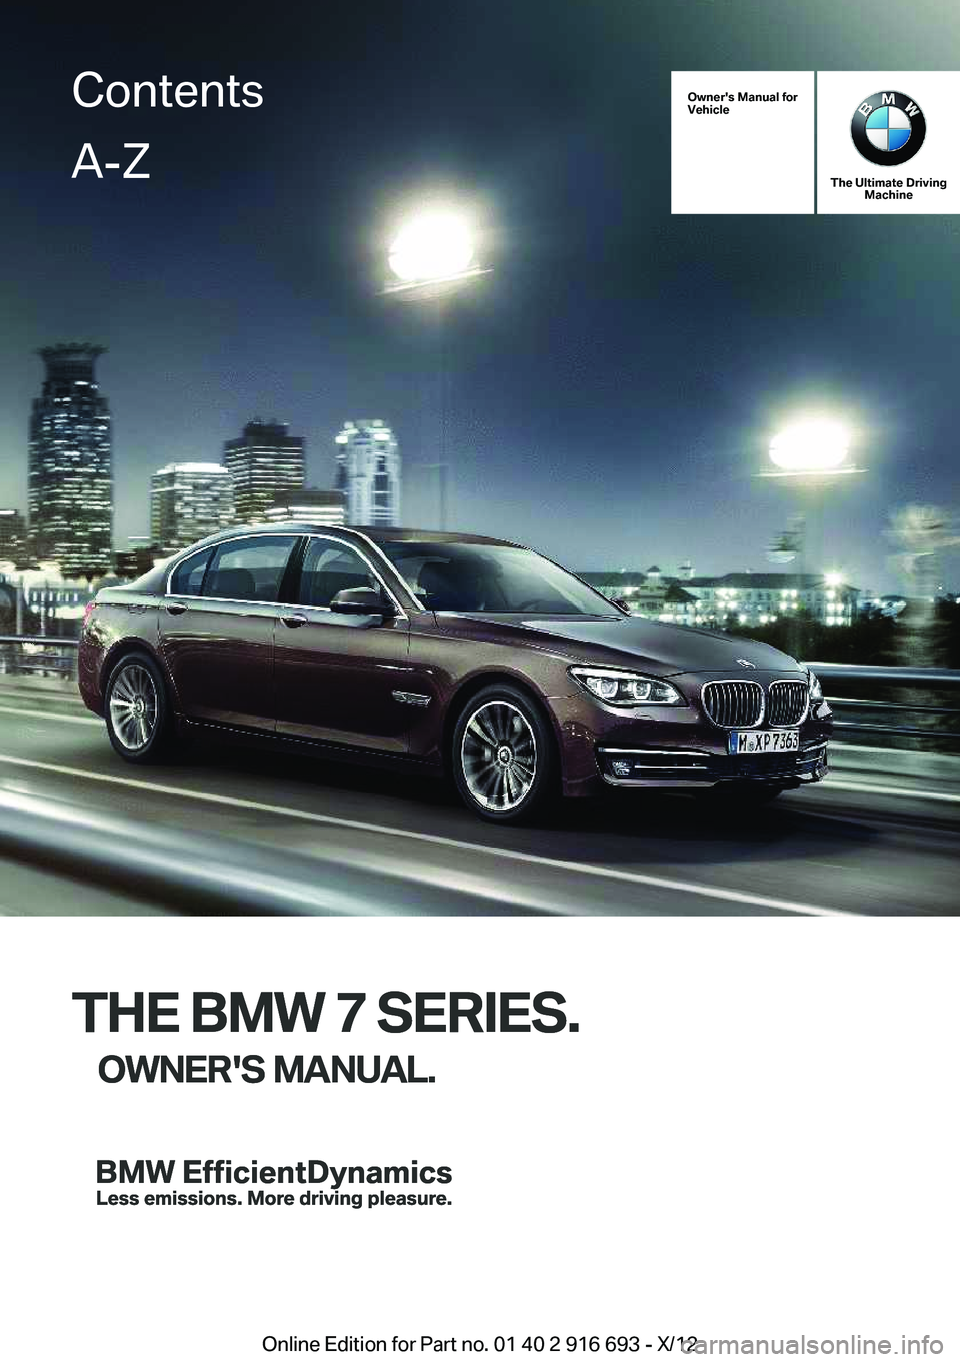 BMW 750I 2013  Owners Manual Owner's Manual for
Vehicle
THE BMW 7 SERIES.
OWNER'S MANUAL.
The Ultimate Driving Machine
THE BMW 7 SERIES.
OWNER'S MANUAL.
ContentsA-Z
Online Edition for Part no. 01 40 2 916 693 - X/12  